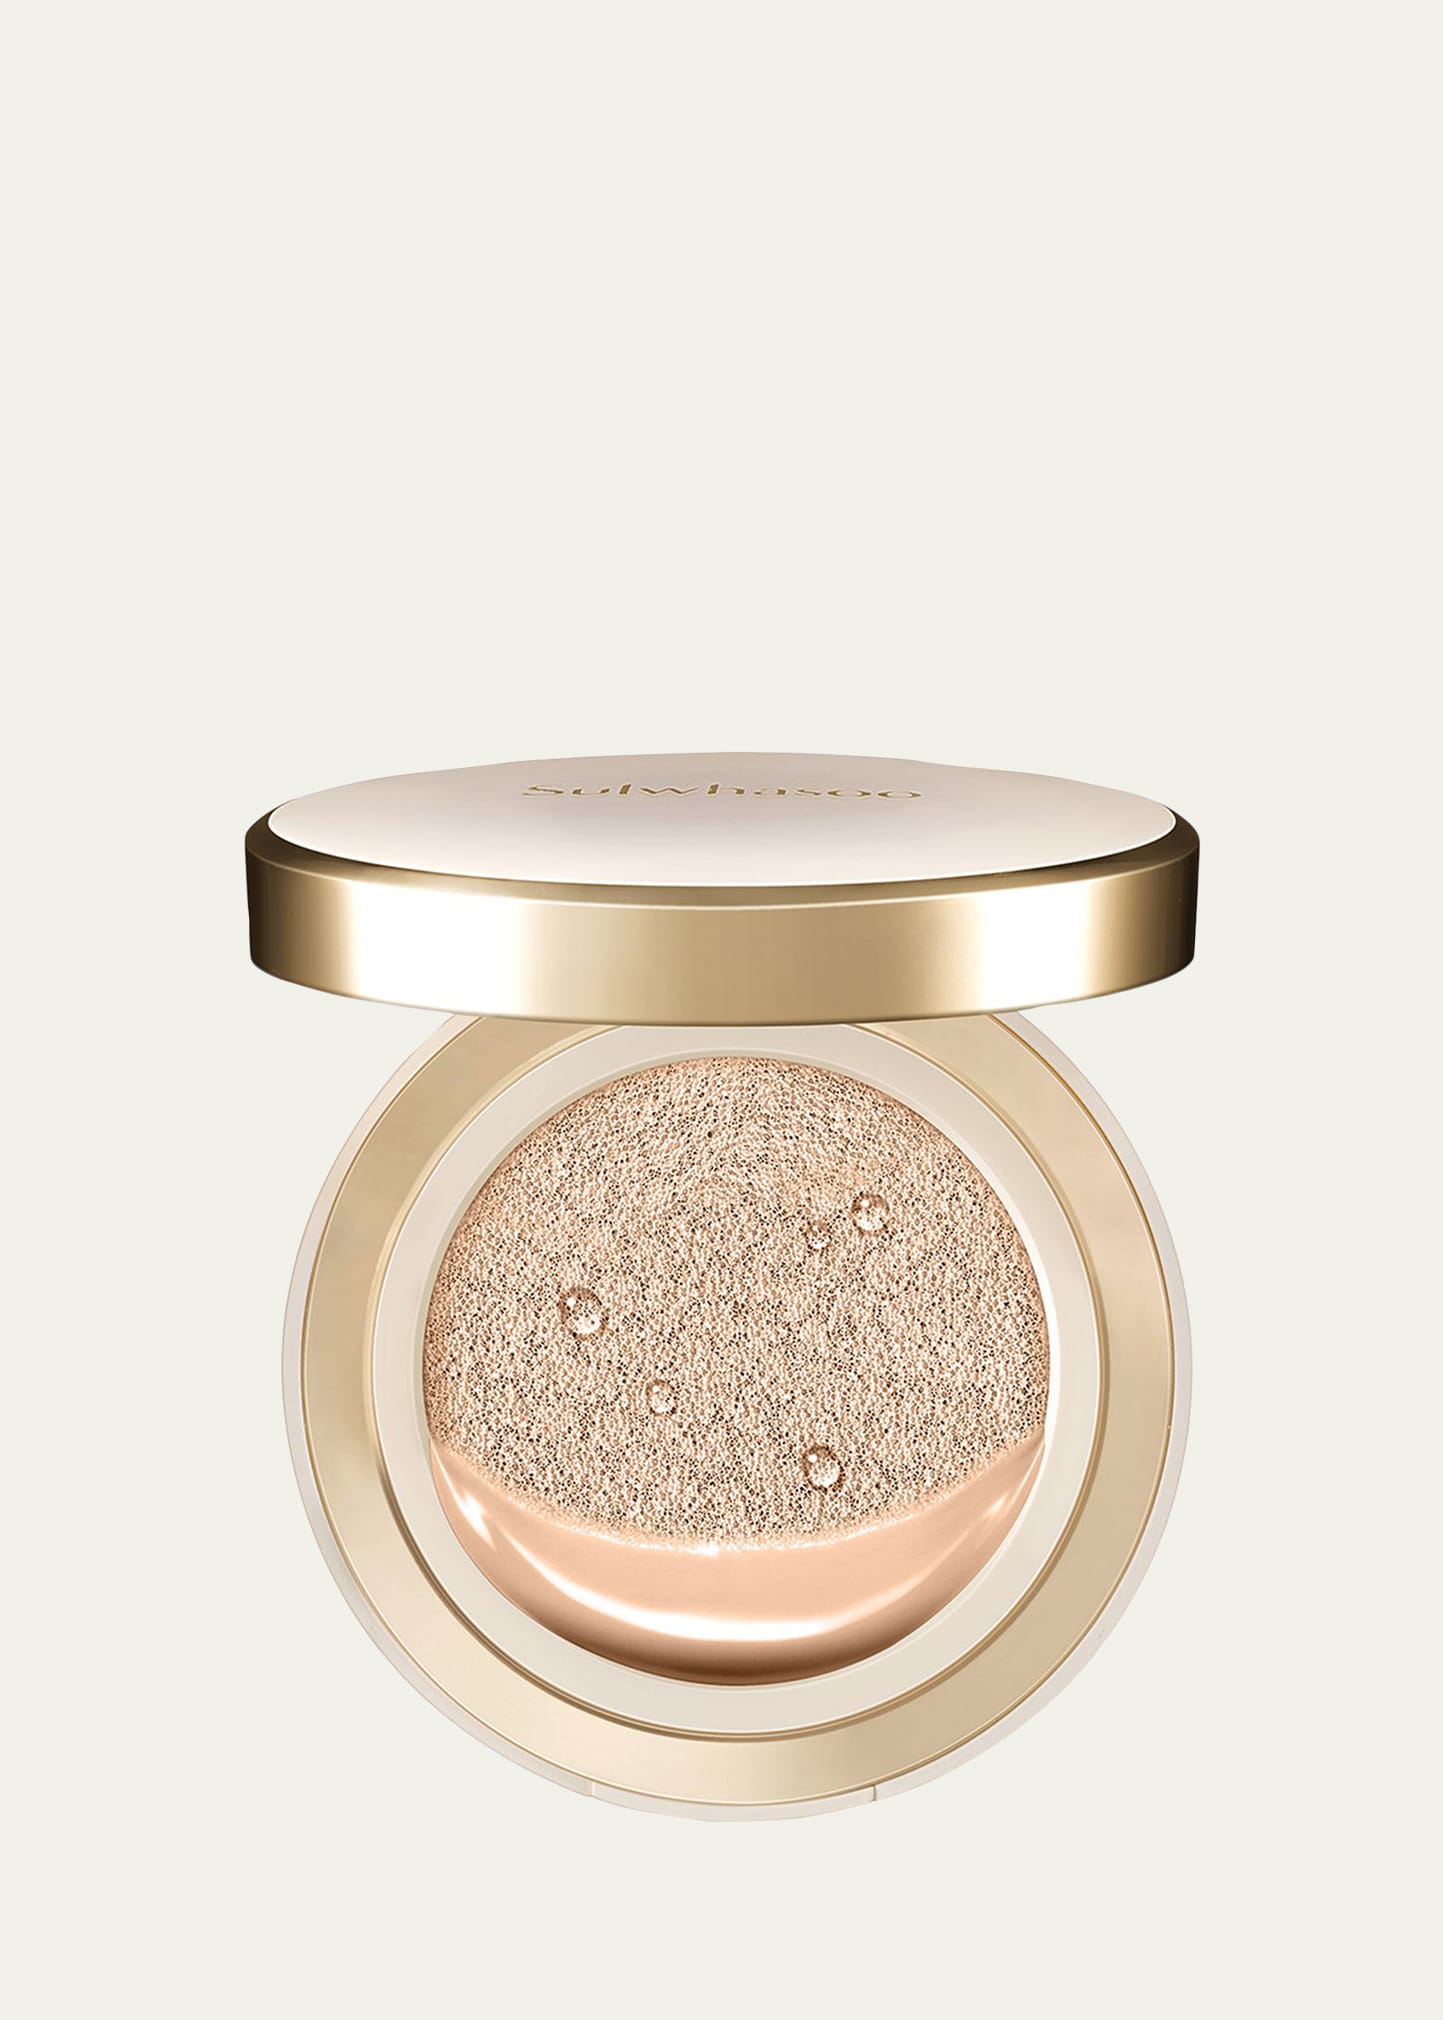 Sulwhasoo Perfecting Cushion In 15 Ivory Pink